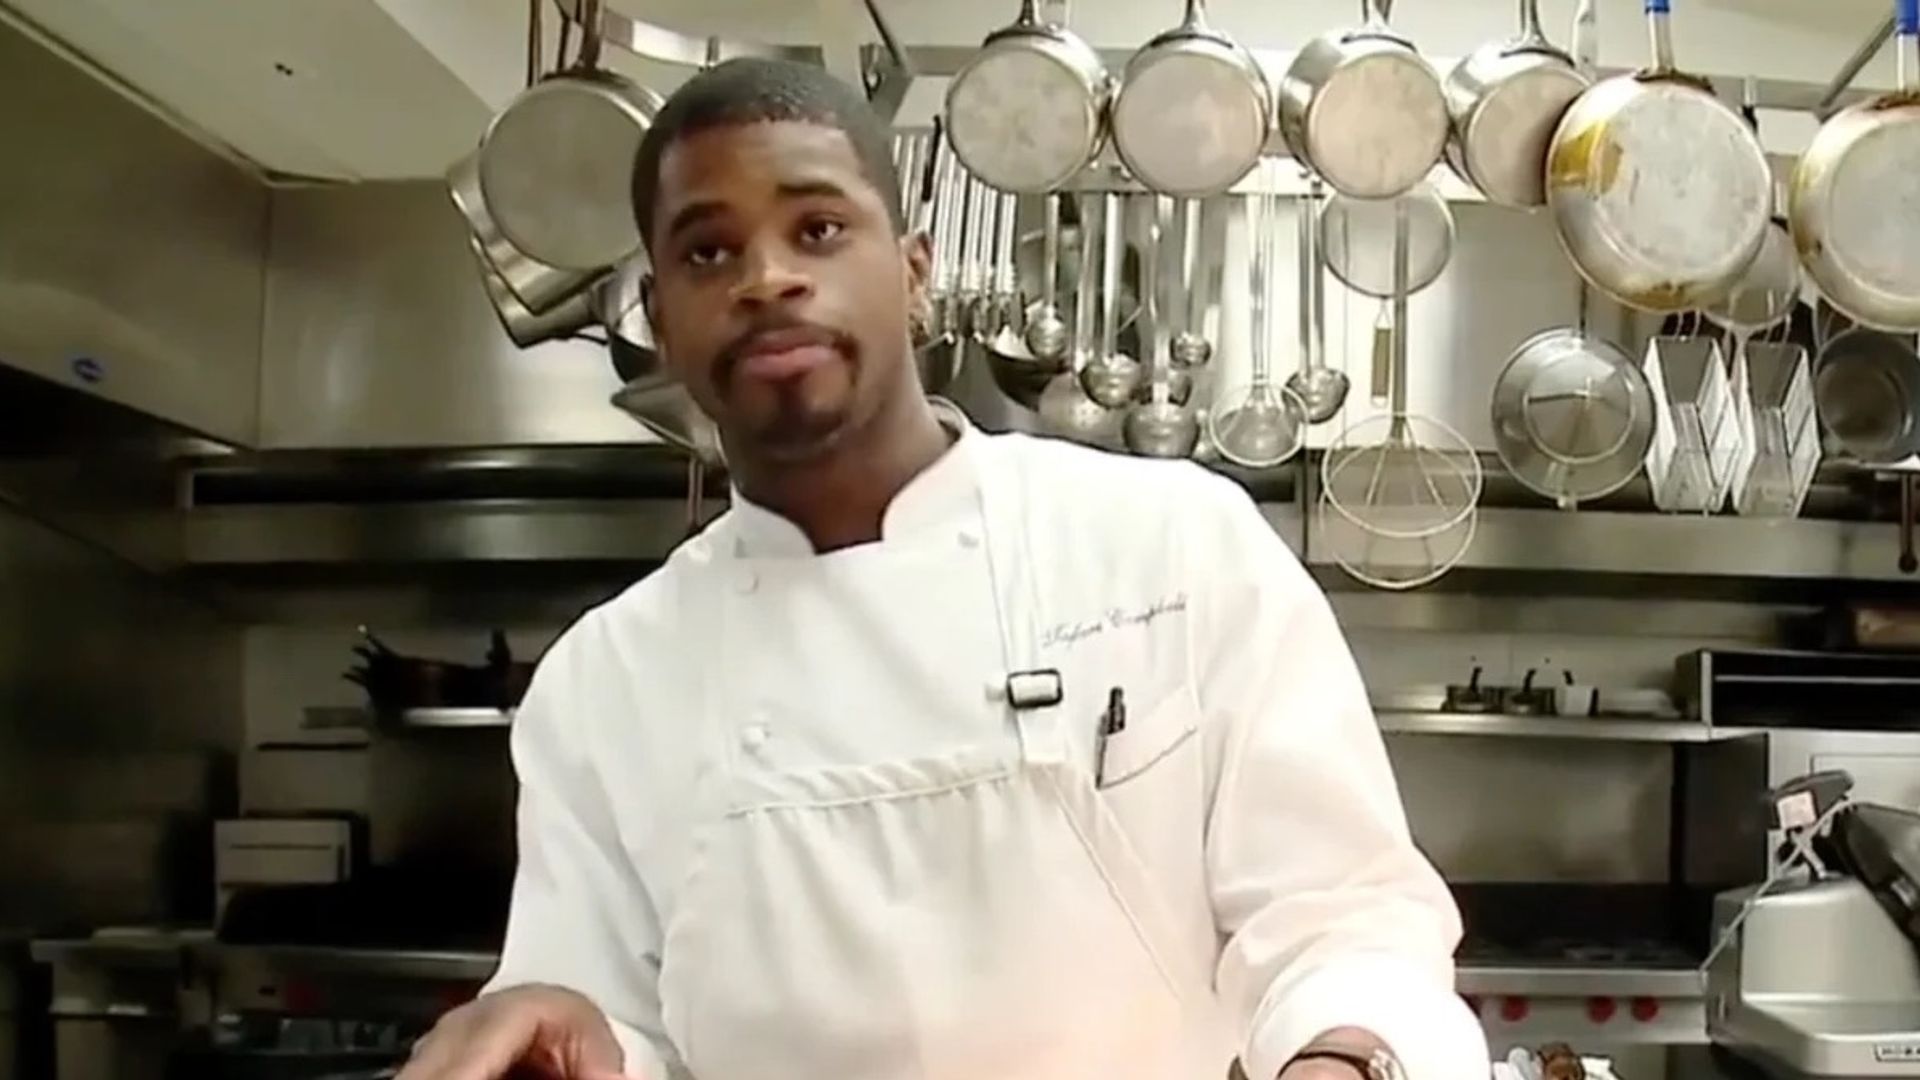 Tafari Campbell, personal chef to President Obama is  working in the White House kitchen